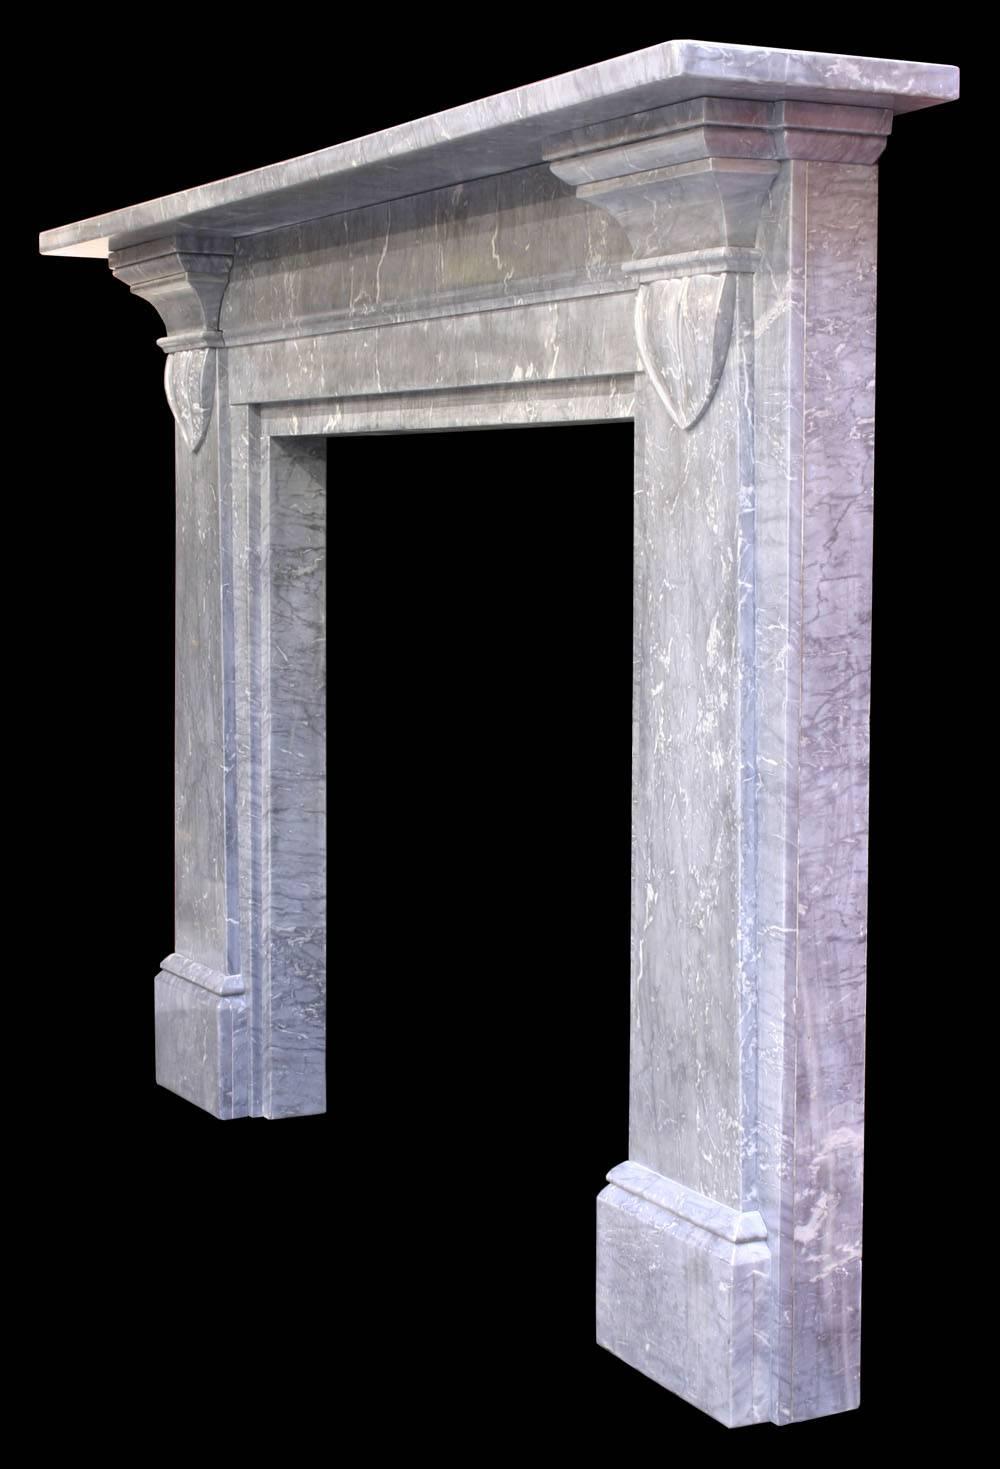 William IV Irish grey marble fire surround with tapering jambs terminating in 'lambs tongue' corbels,
circa 1830.
Measures:
Shelf 73